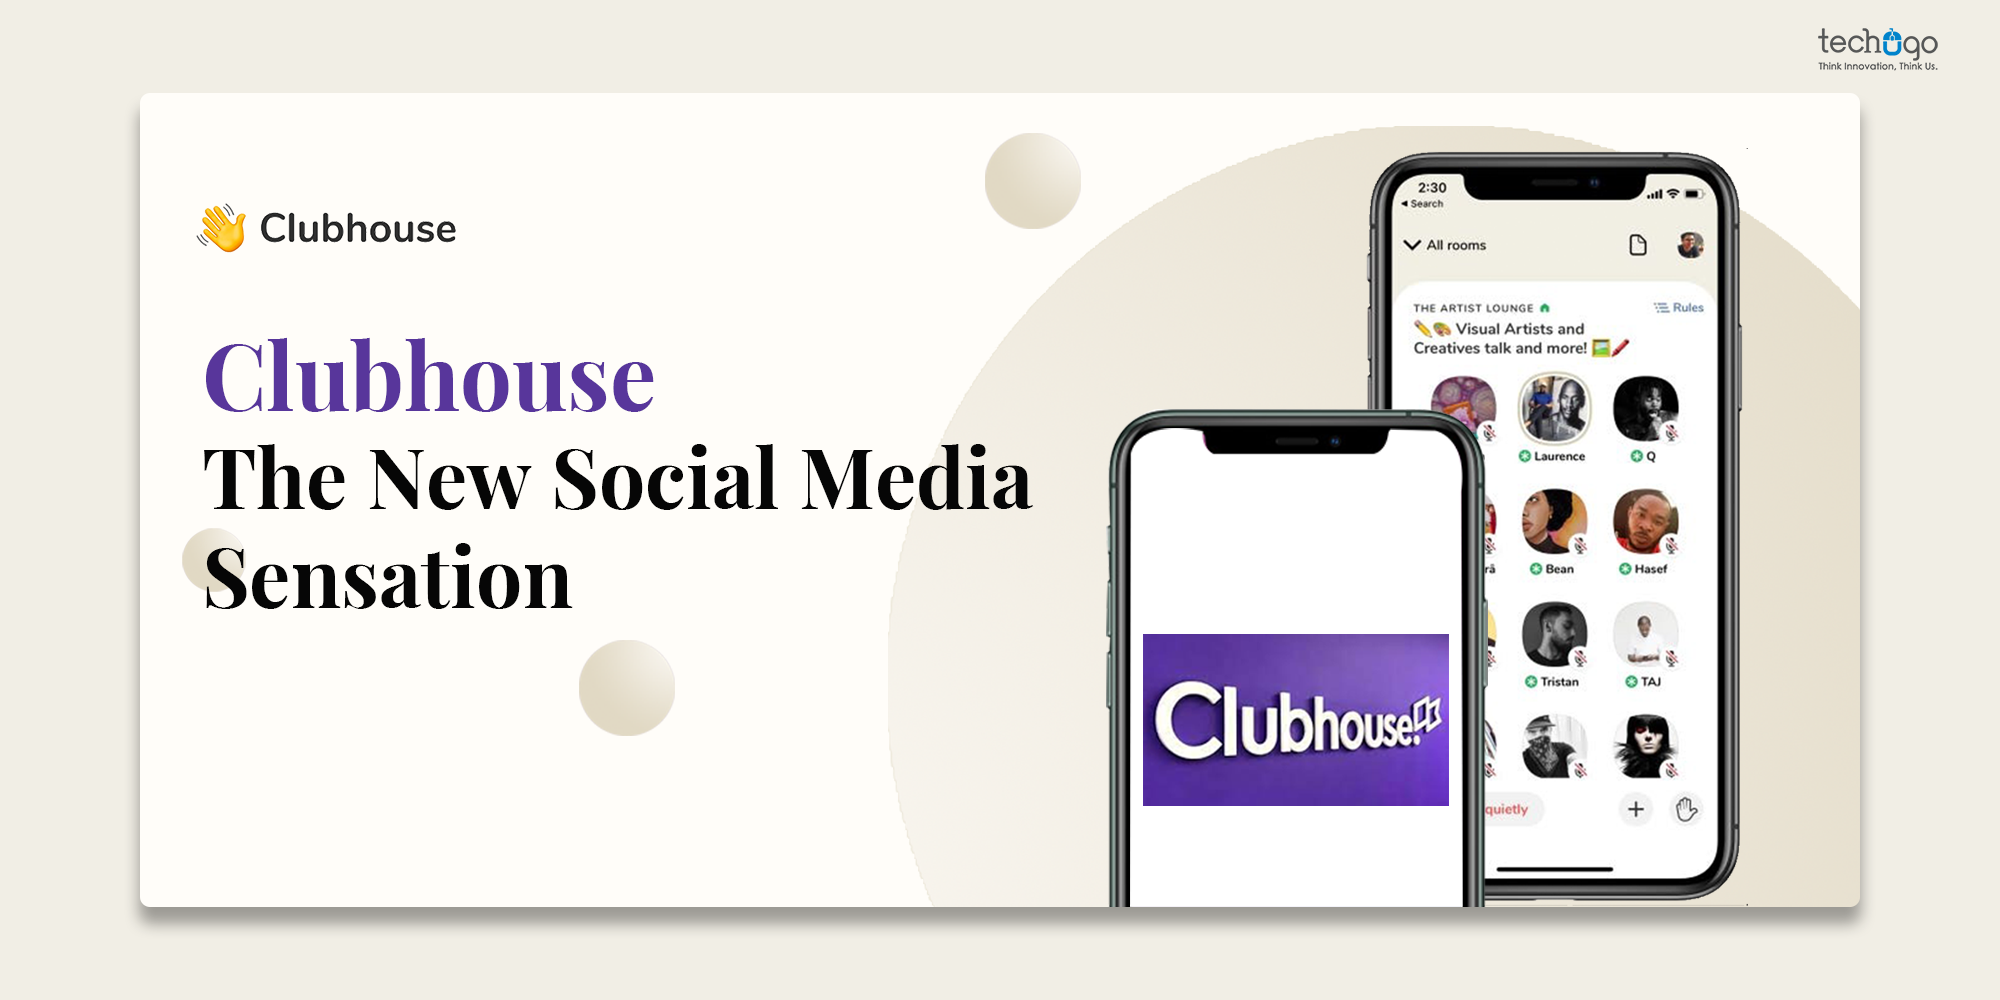 Clubhouse: The New Social Media Sensation